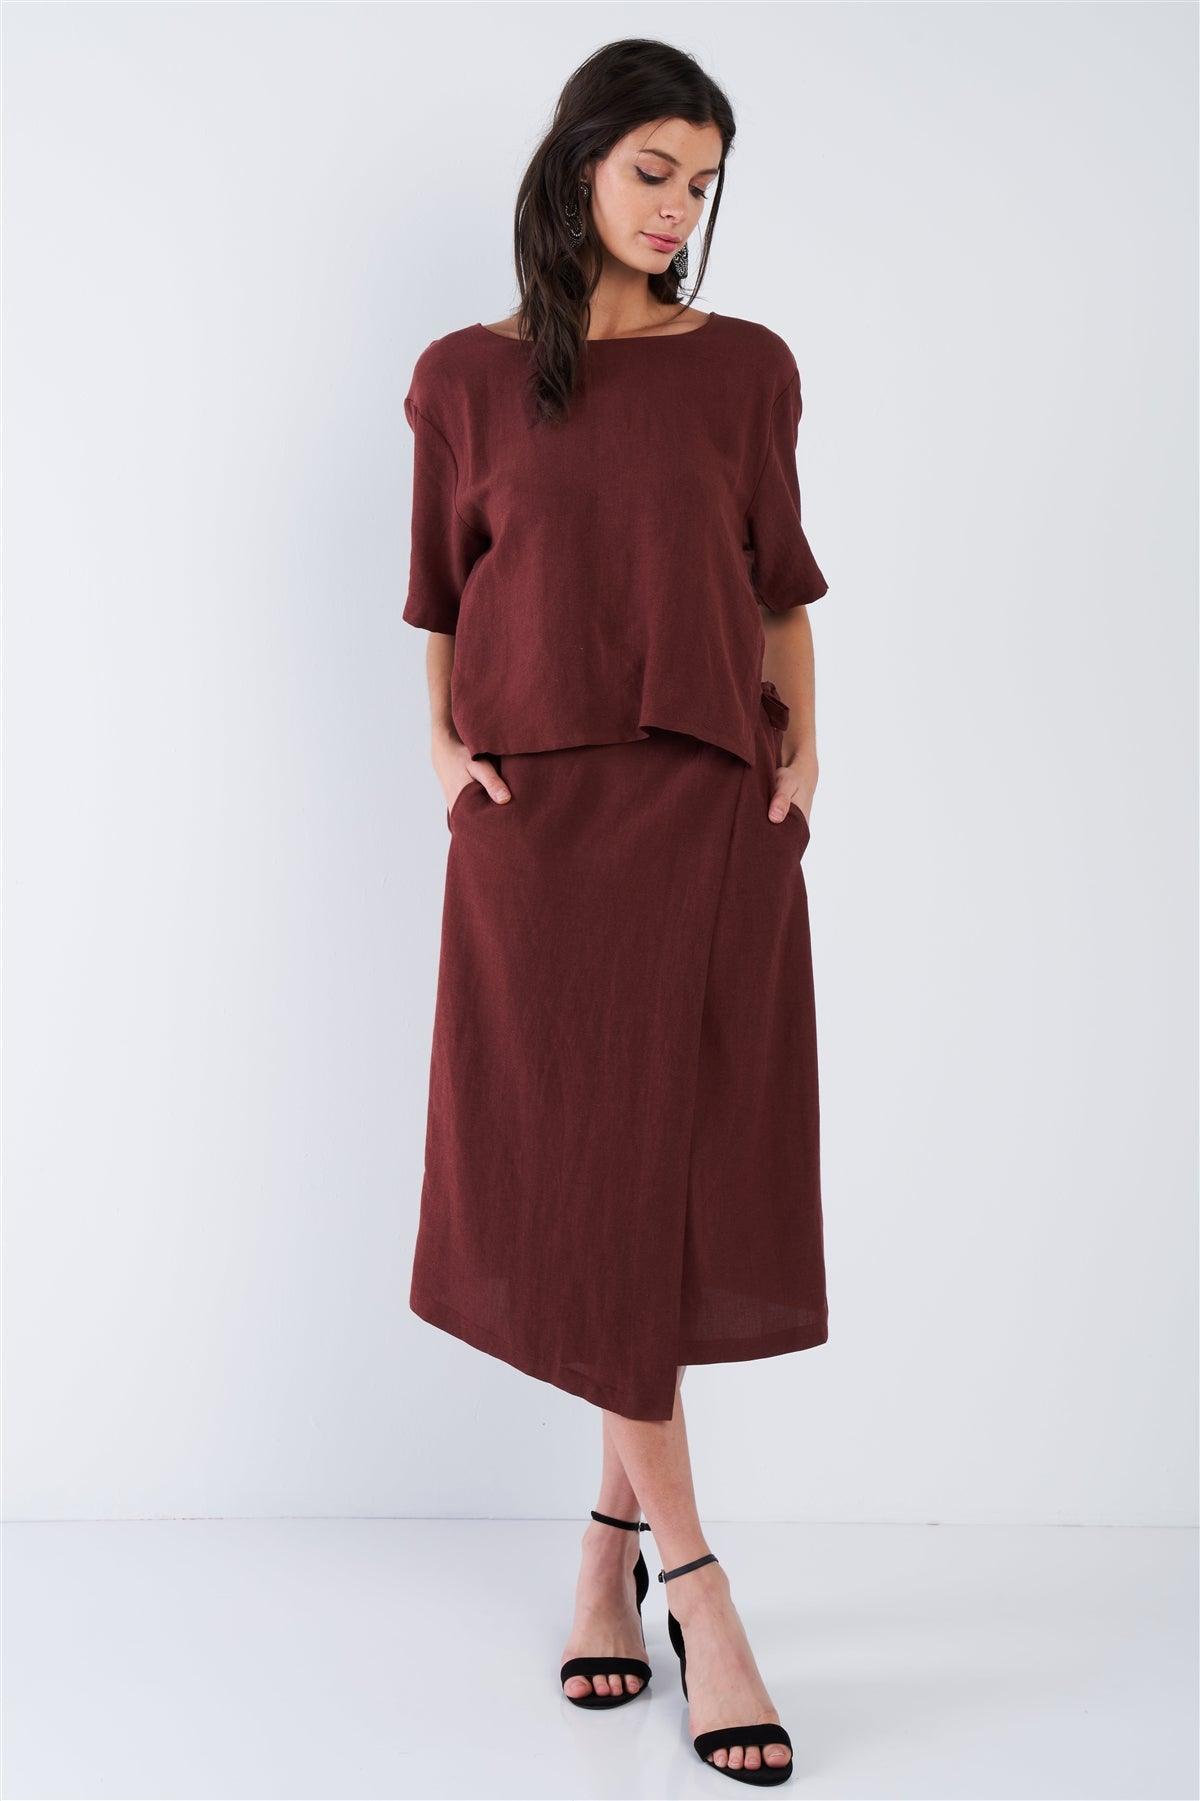 Maroon Brown Center Cut Out V-Neck Midi Wrap Dress